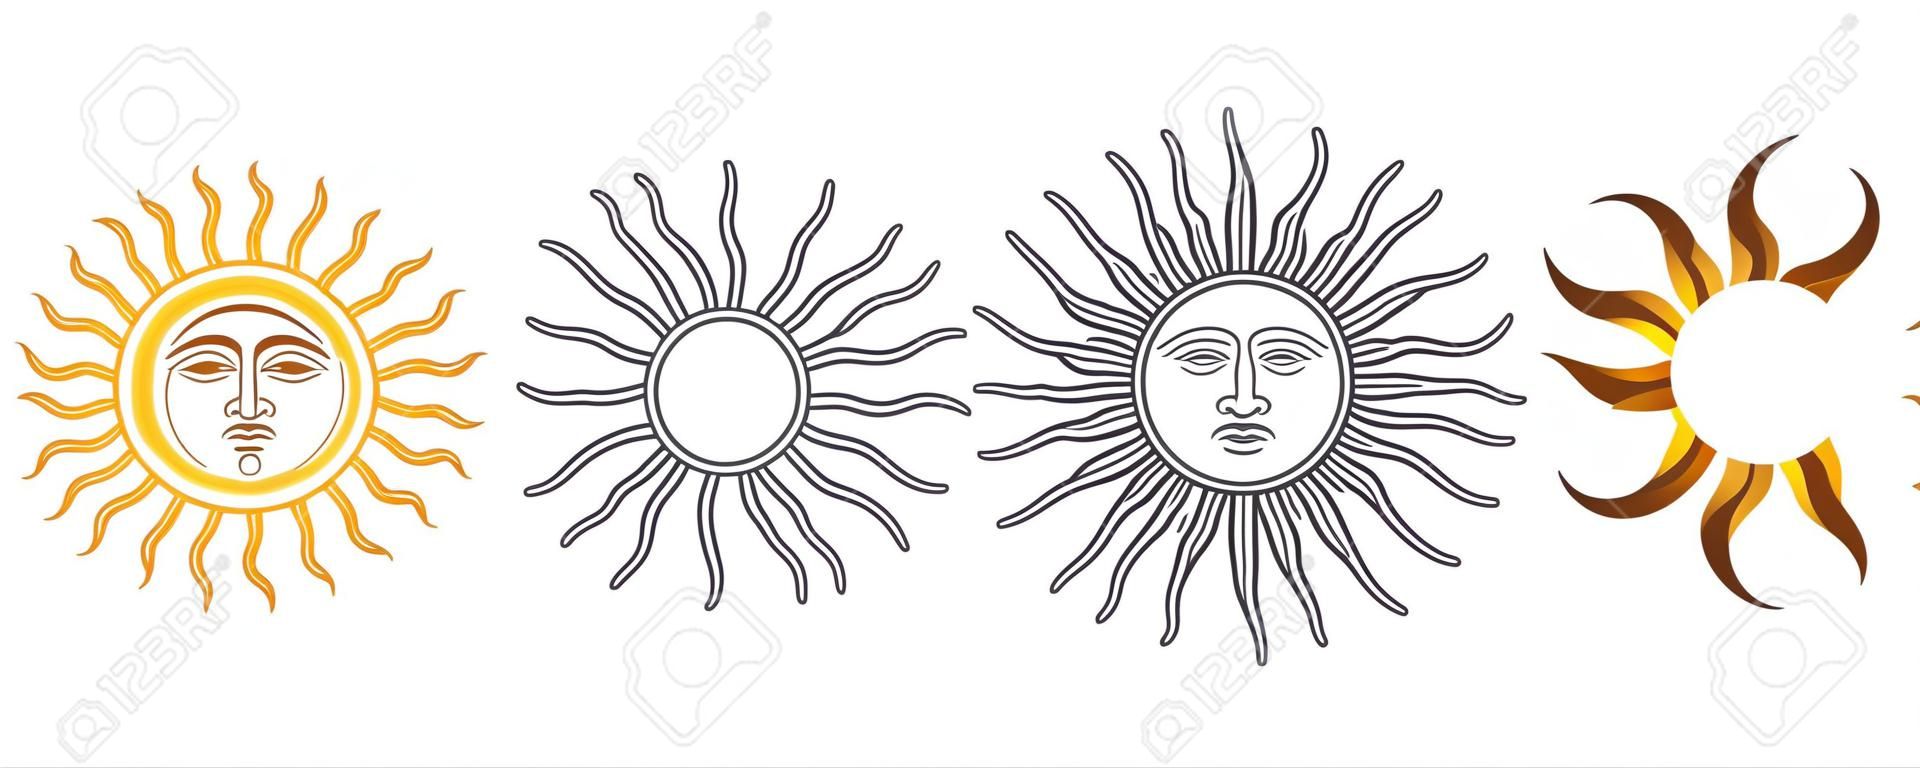 Sun of May variations. Spanish Sol de Mayo, national emblems of Uruguay and Argentina. Radiant, silver or golden yellow sun with human face and straight and wavy rays. Illustration over white. Vector.